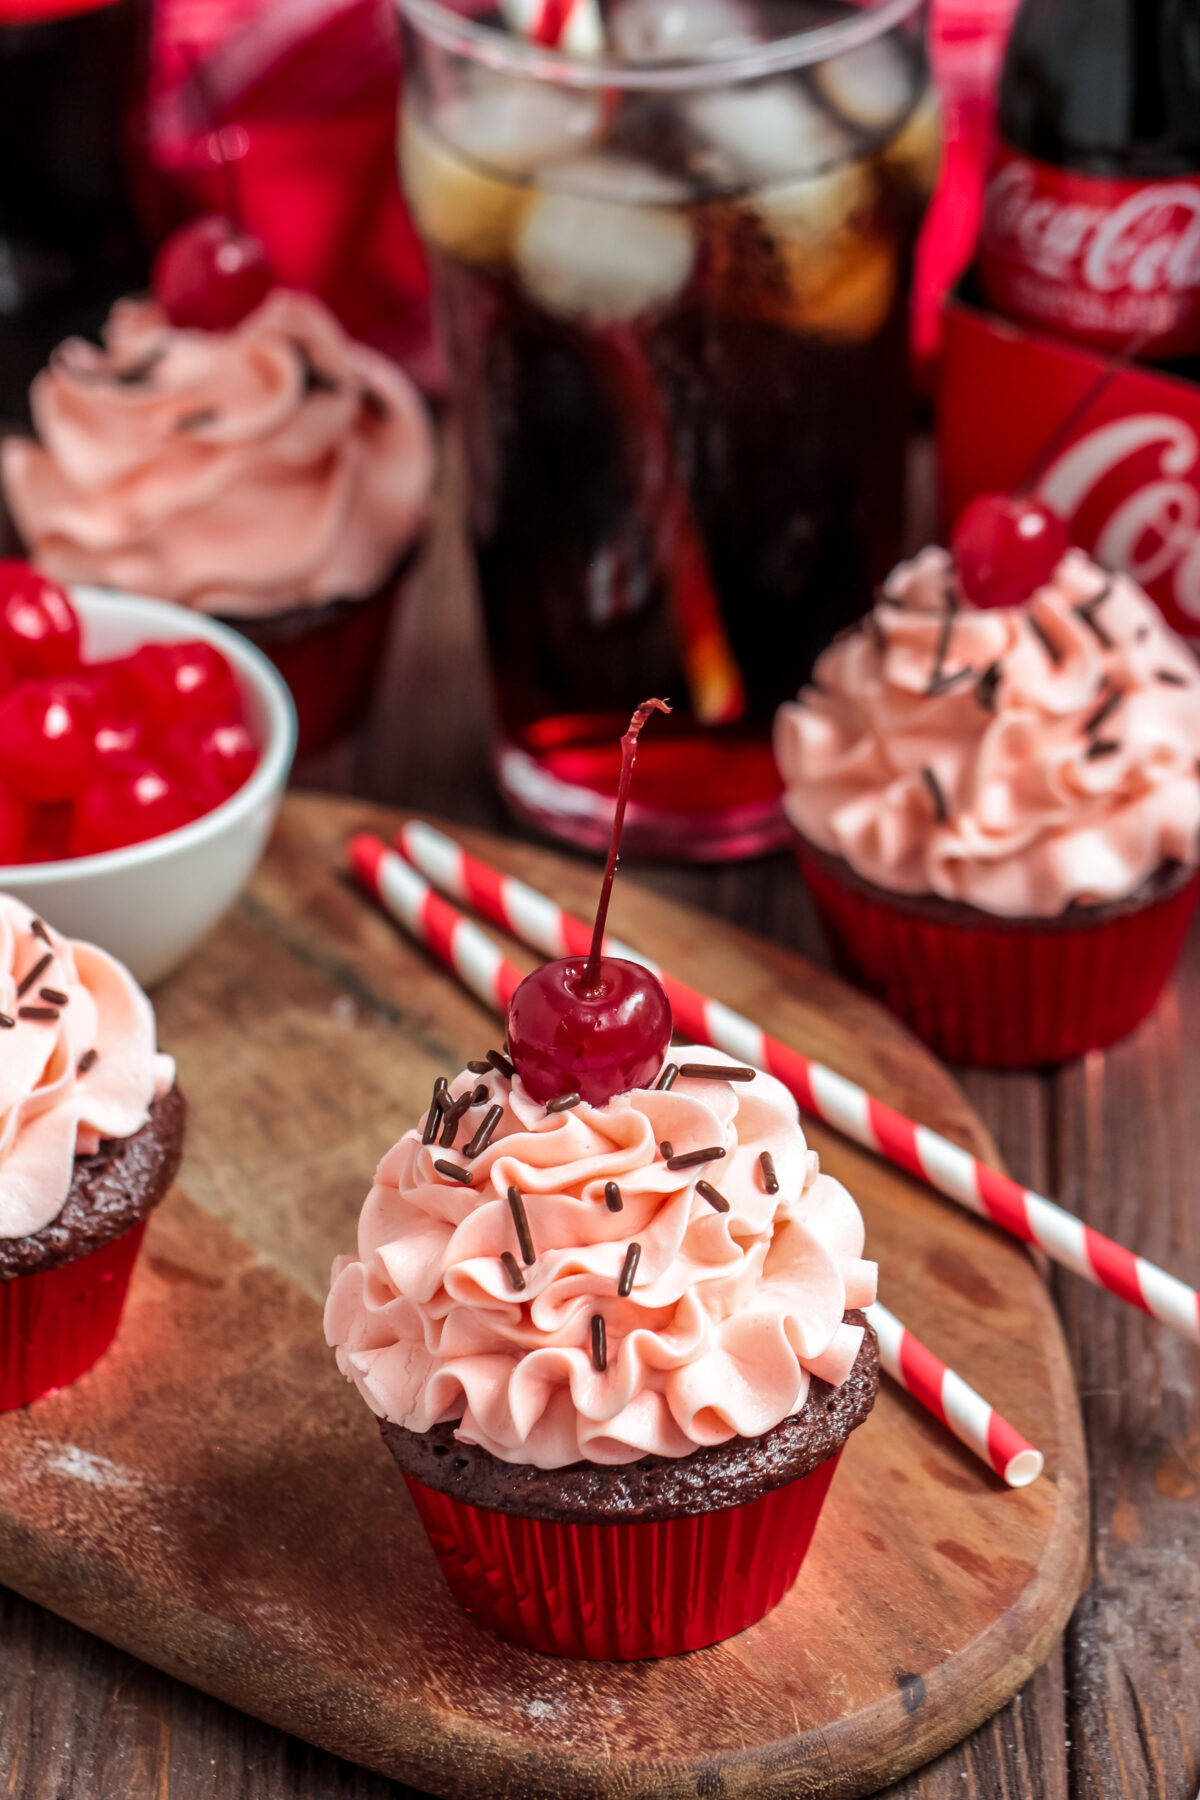 An easy recipe for tasty cherry coke cupcakes made with chocolate cake mix, cola, and maraschino cherries. A perfect treat for any occasion!